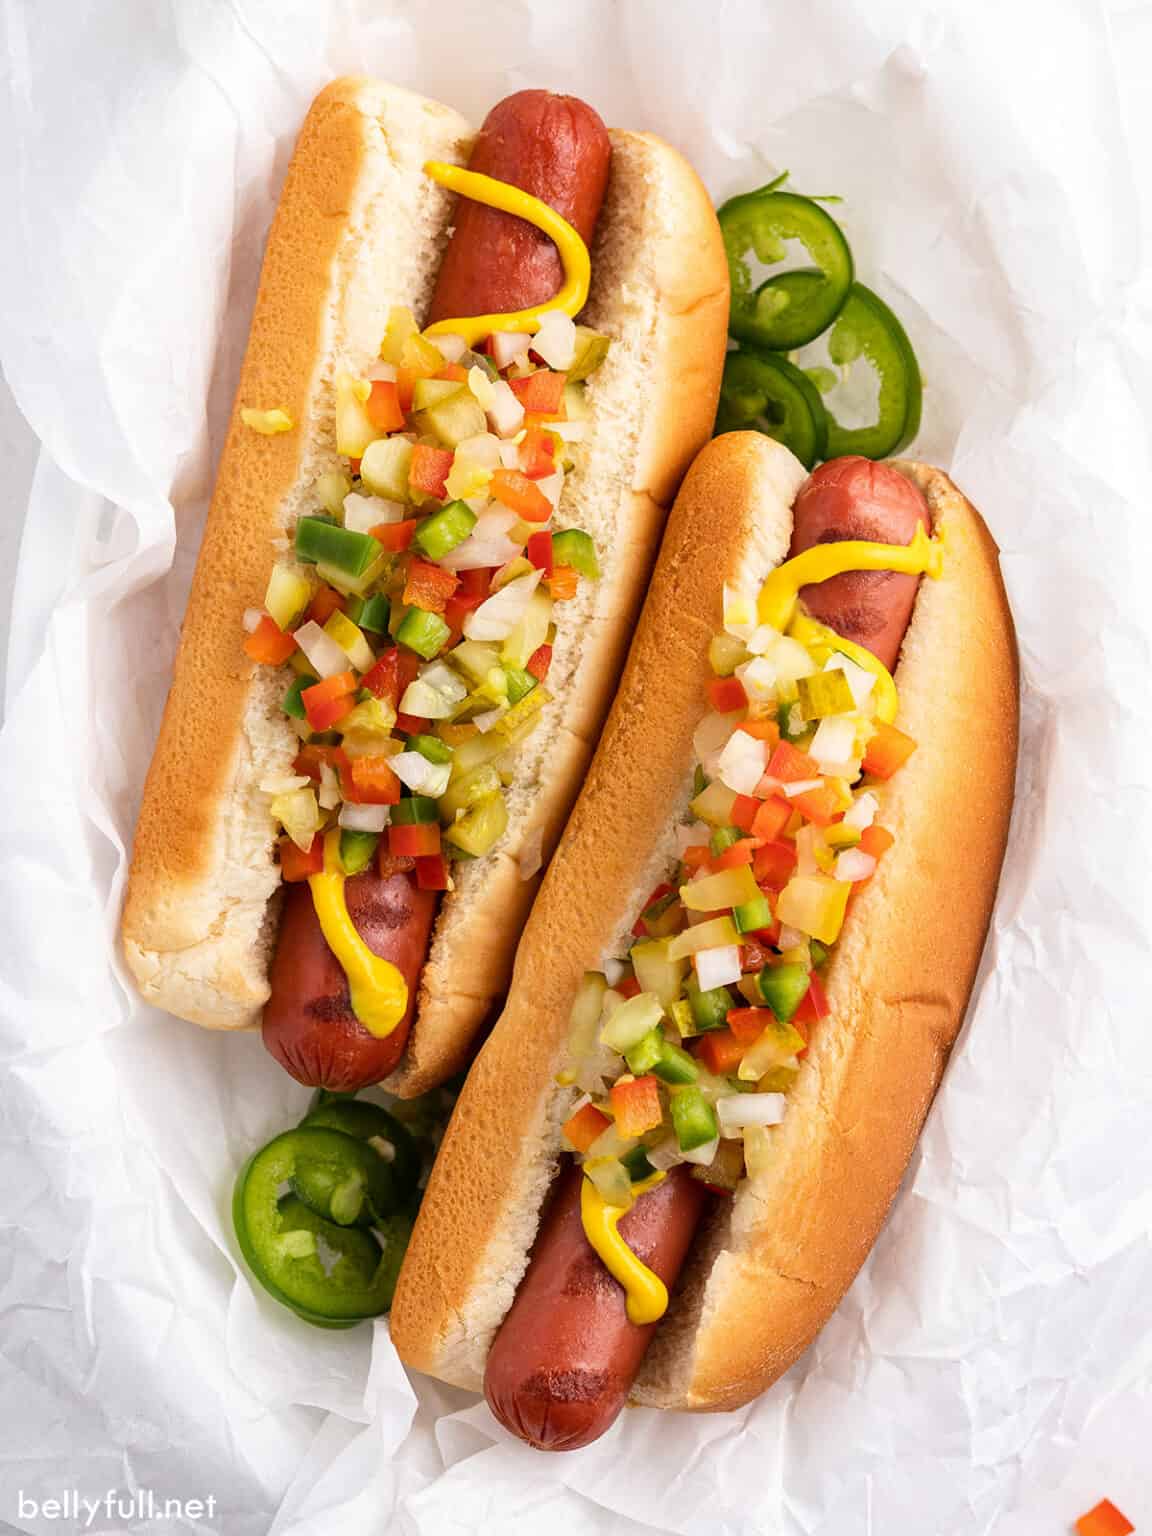 Pickle de gallo, a flavorful topping for hot dogs